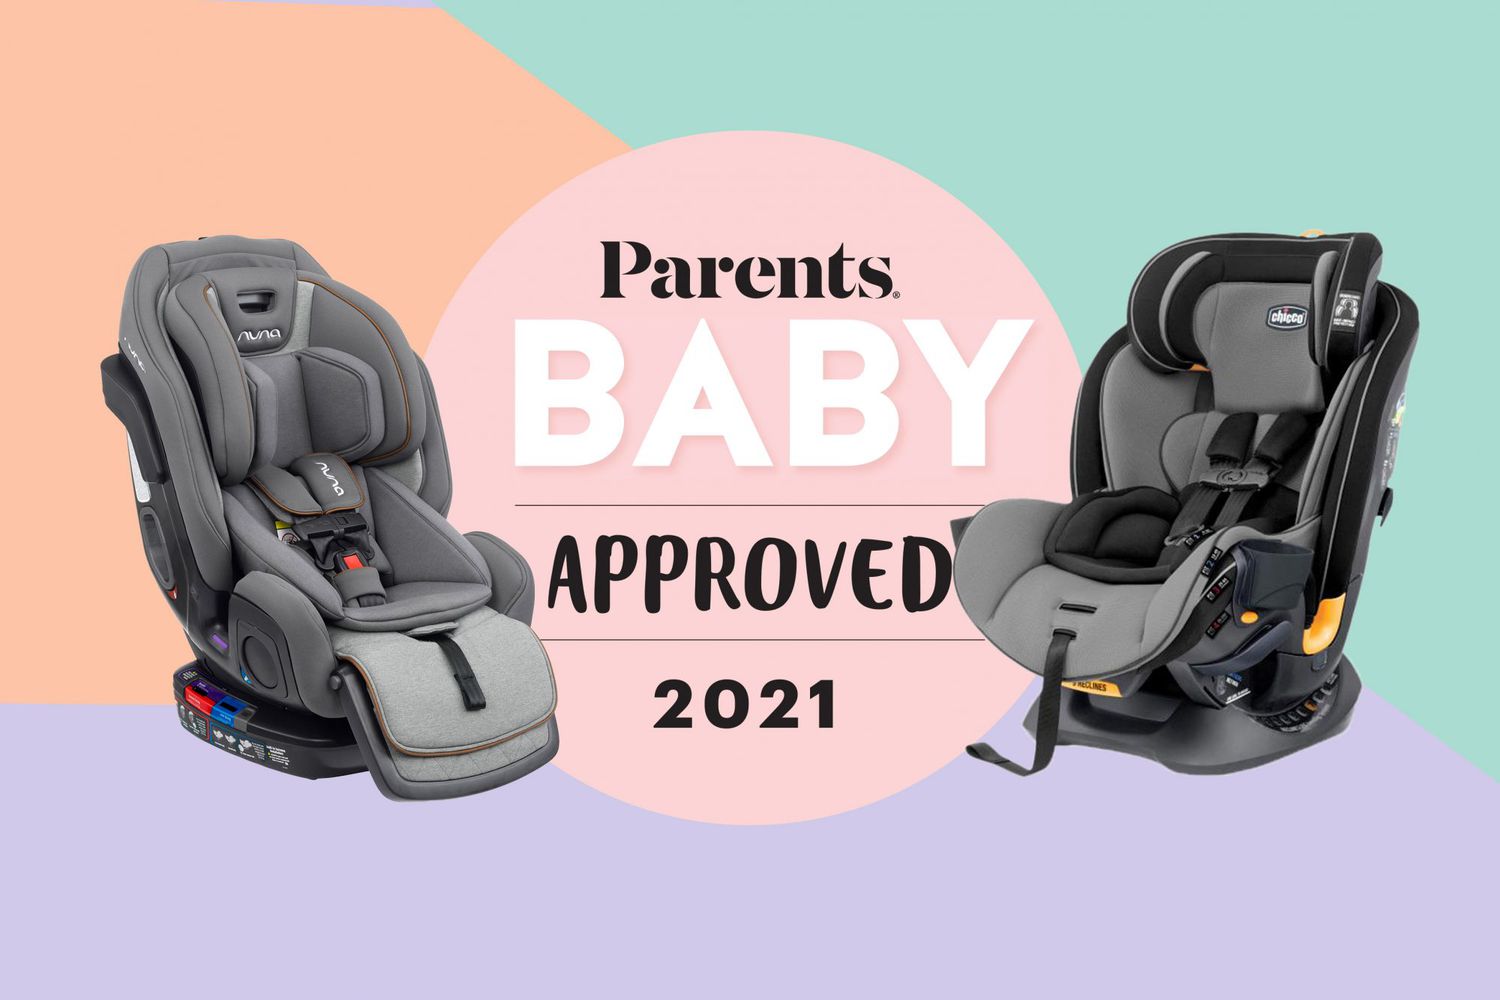 11 Best Convertible Car Seats 2021, Best Convertible Car Seat For Hot Climates